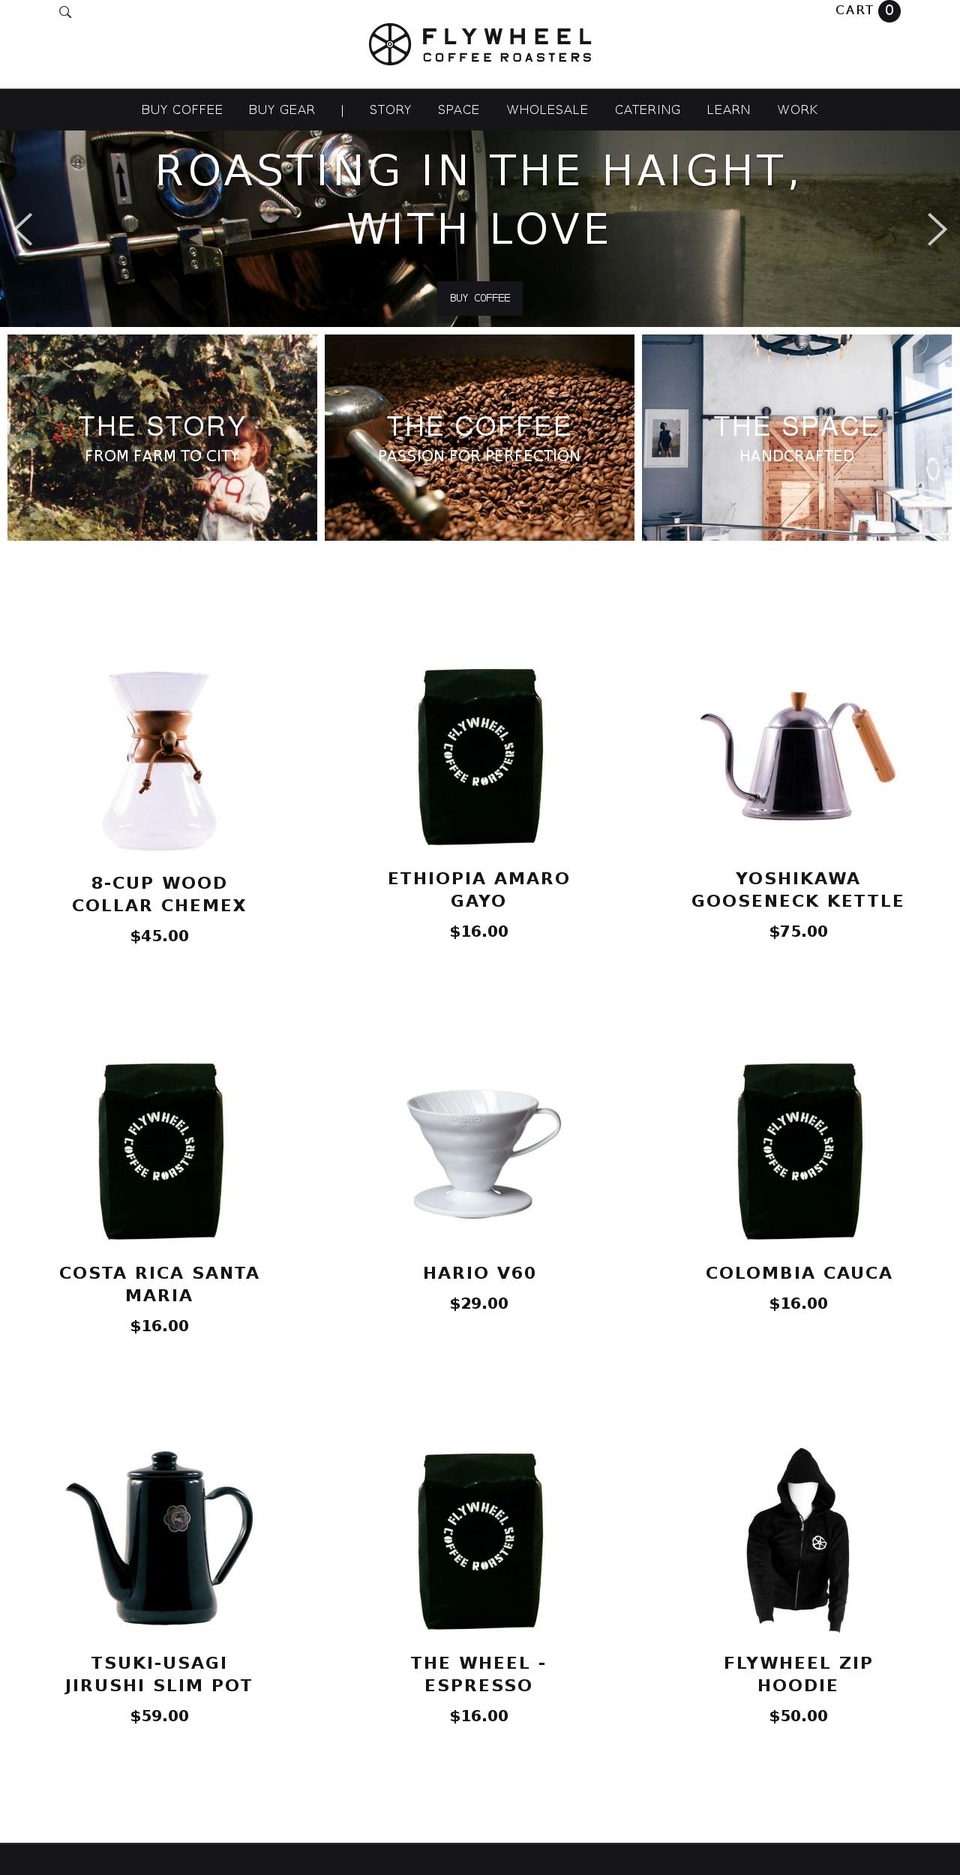 Timber Shopify theme site example flywheelcoffee.com